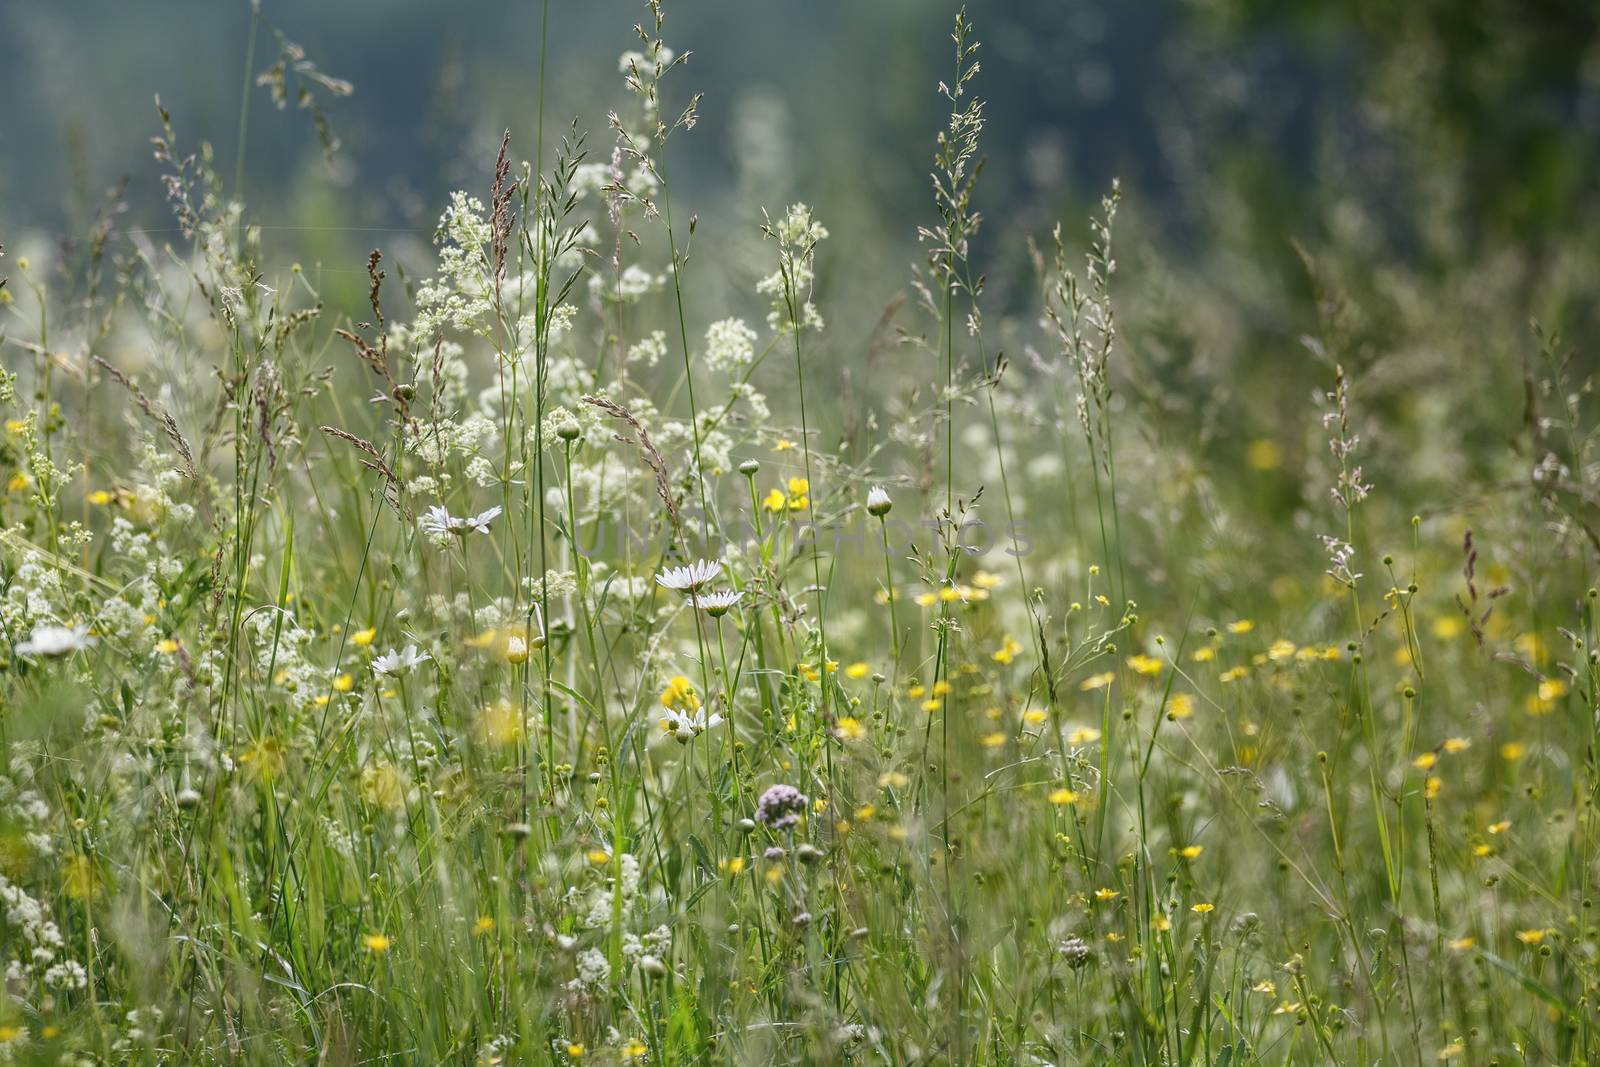 Summer grasses with shallow depth of field